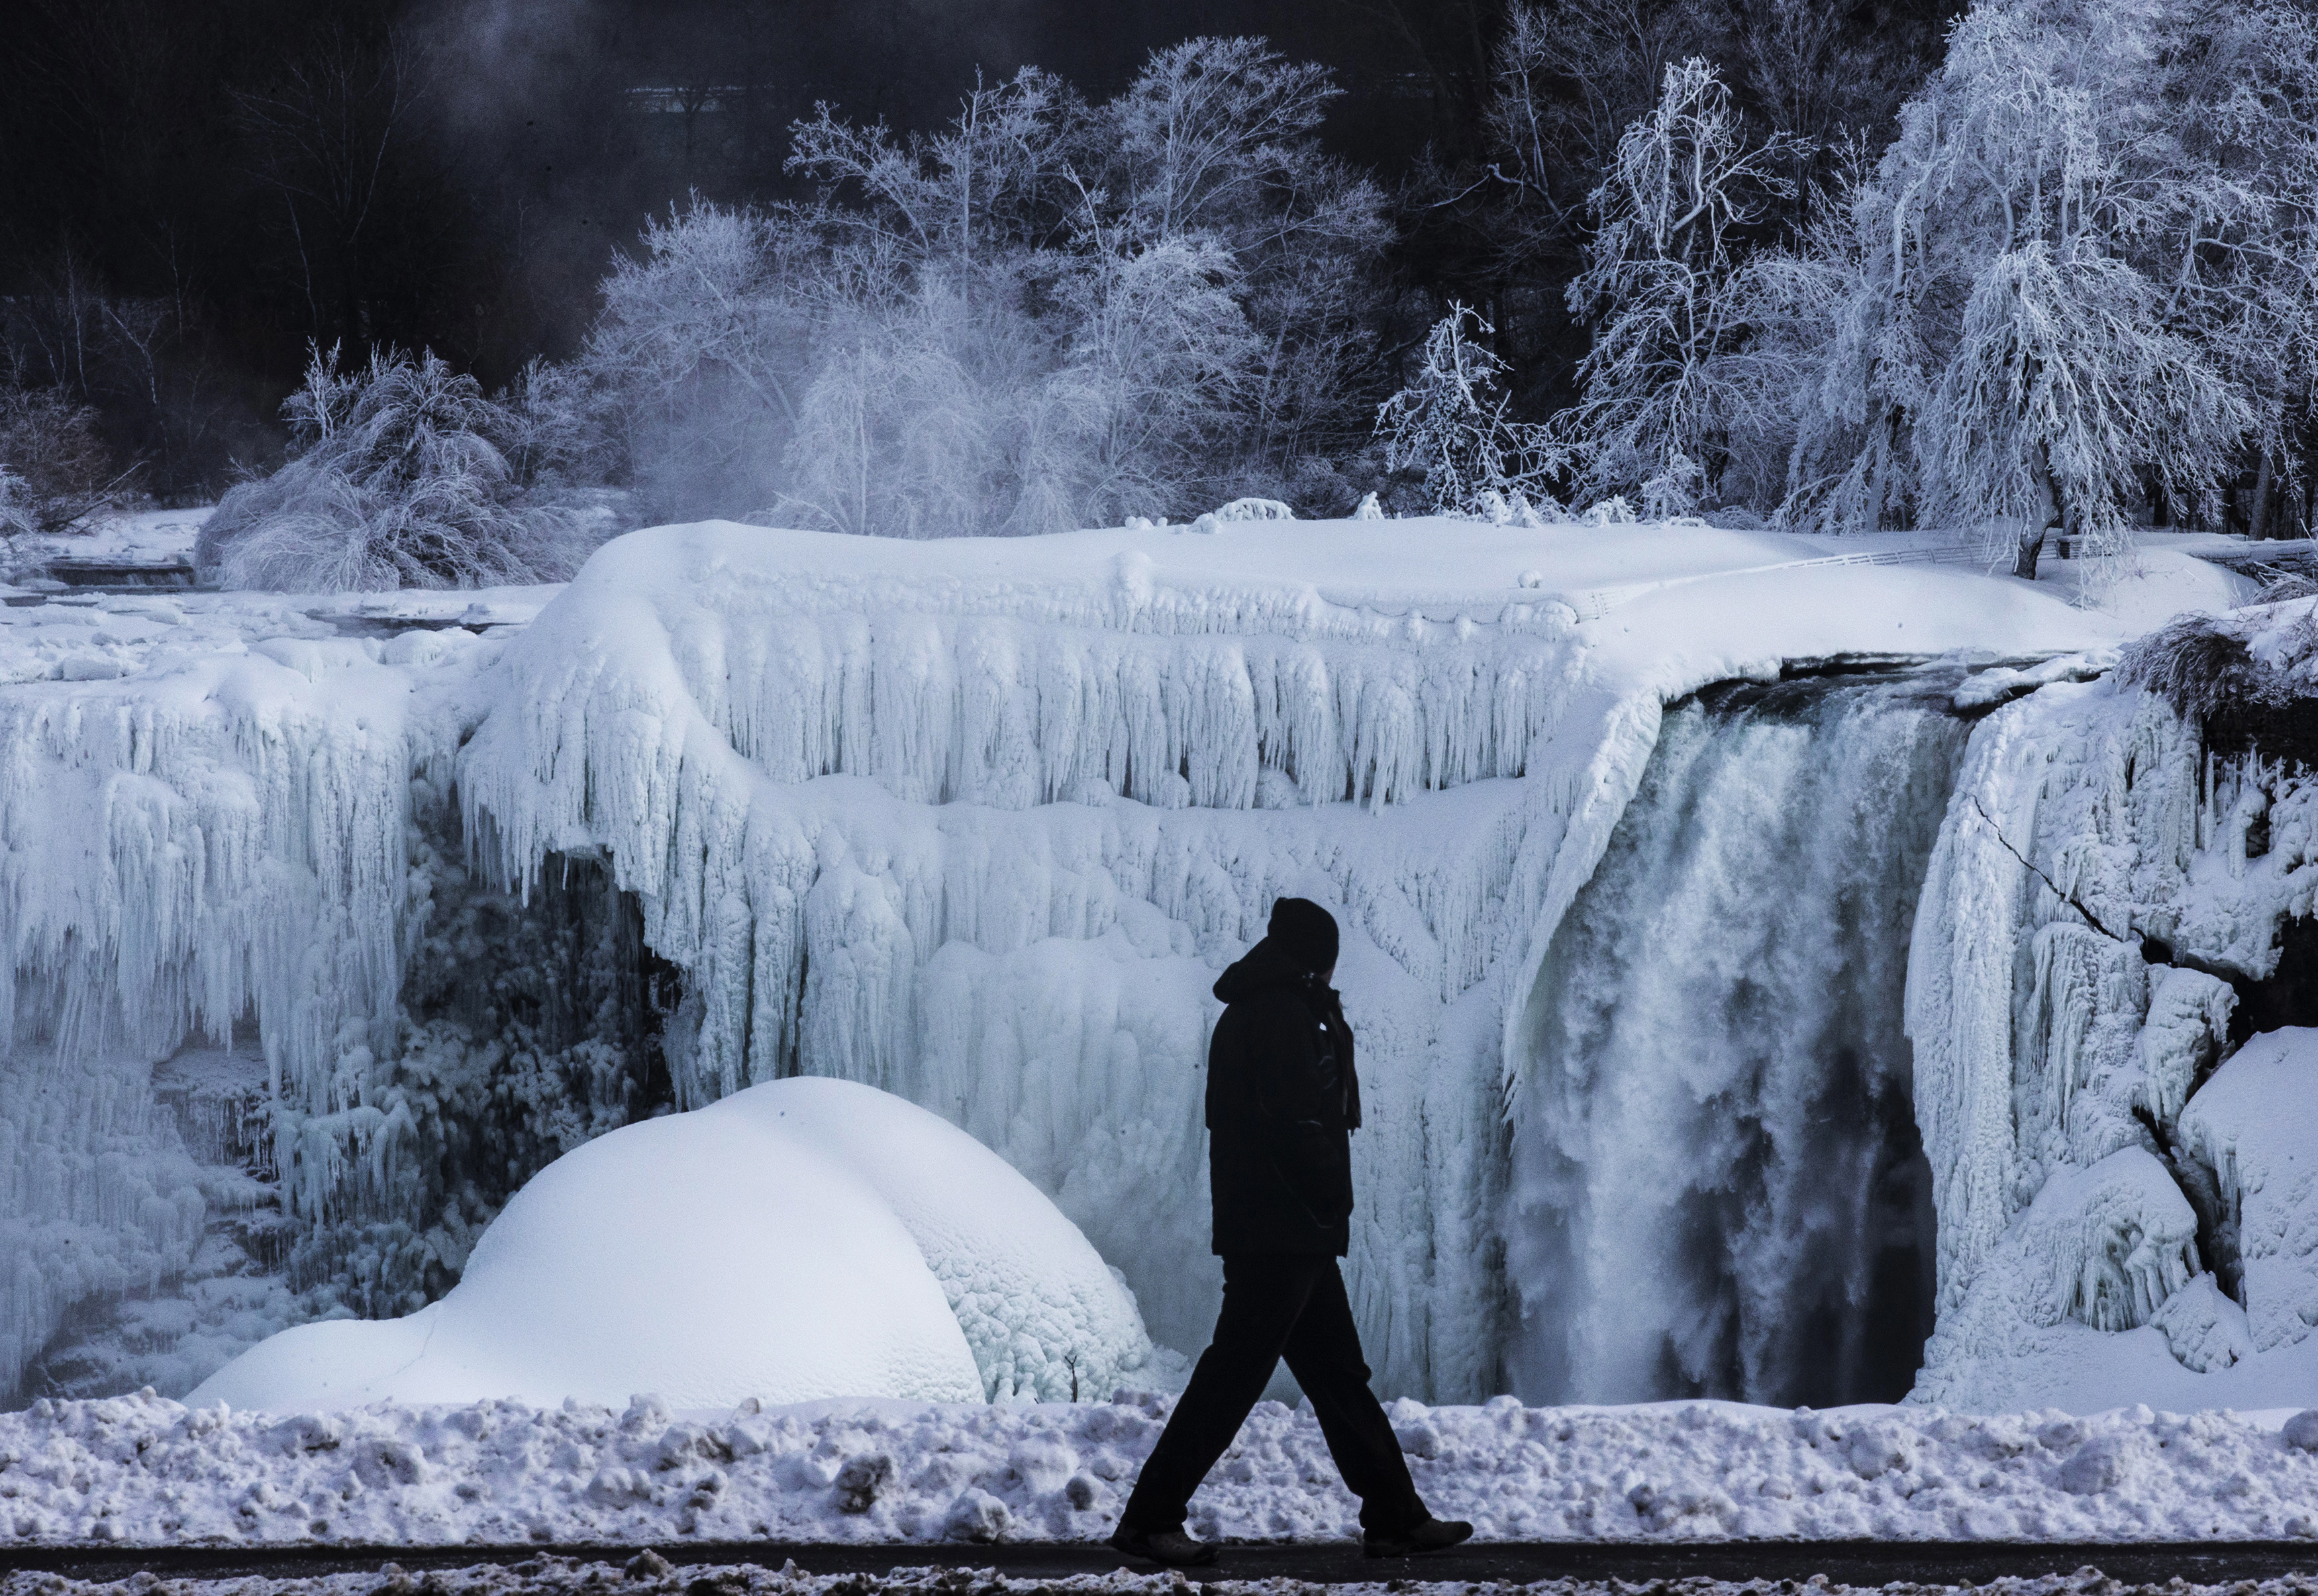 A man walks in front of partially frozen American side of Niagara Falls on during sub-freezing temperatures in Niagara Falls